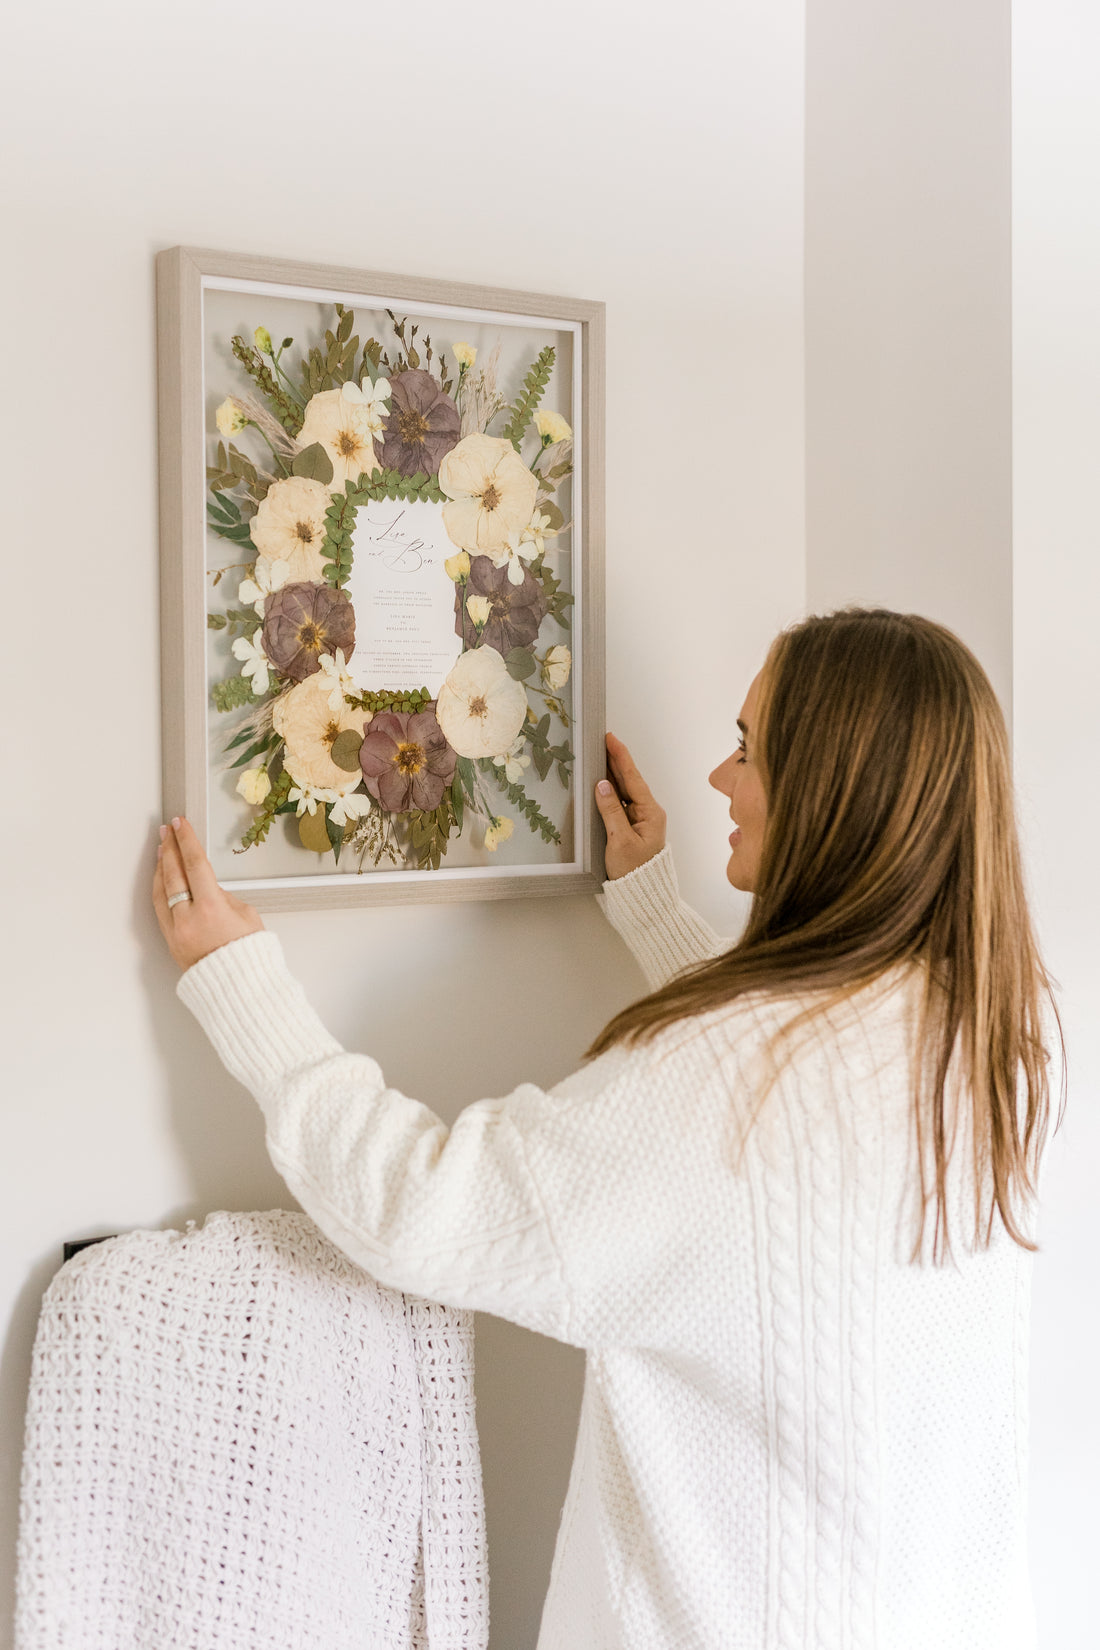 A woman hangs her pressed wedding bouquet on a wall above a blanket rack. The pressed flowers surround her wedding invitation that she smiles up at while hanging.